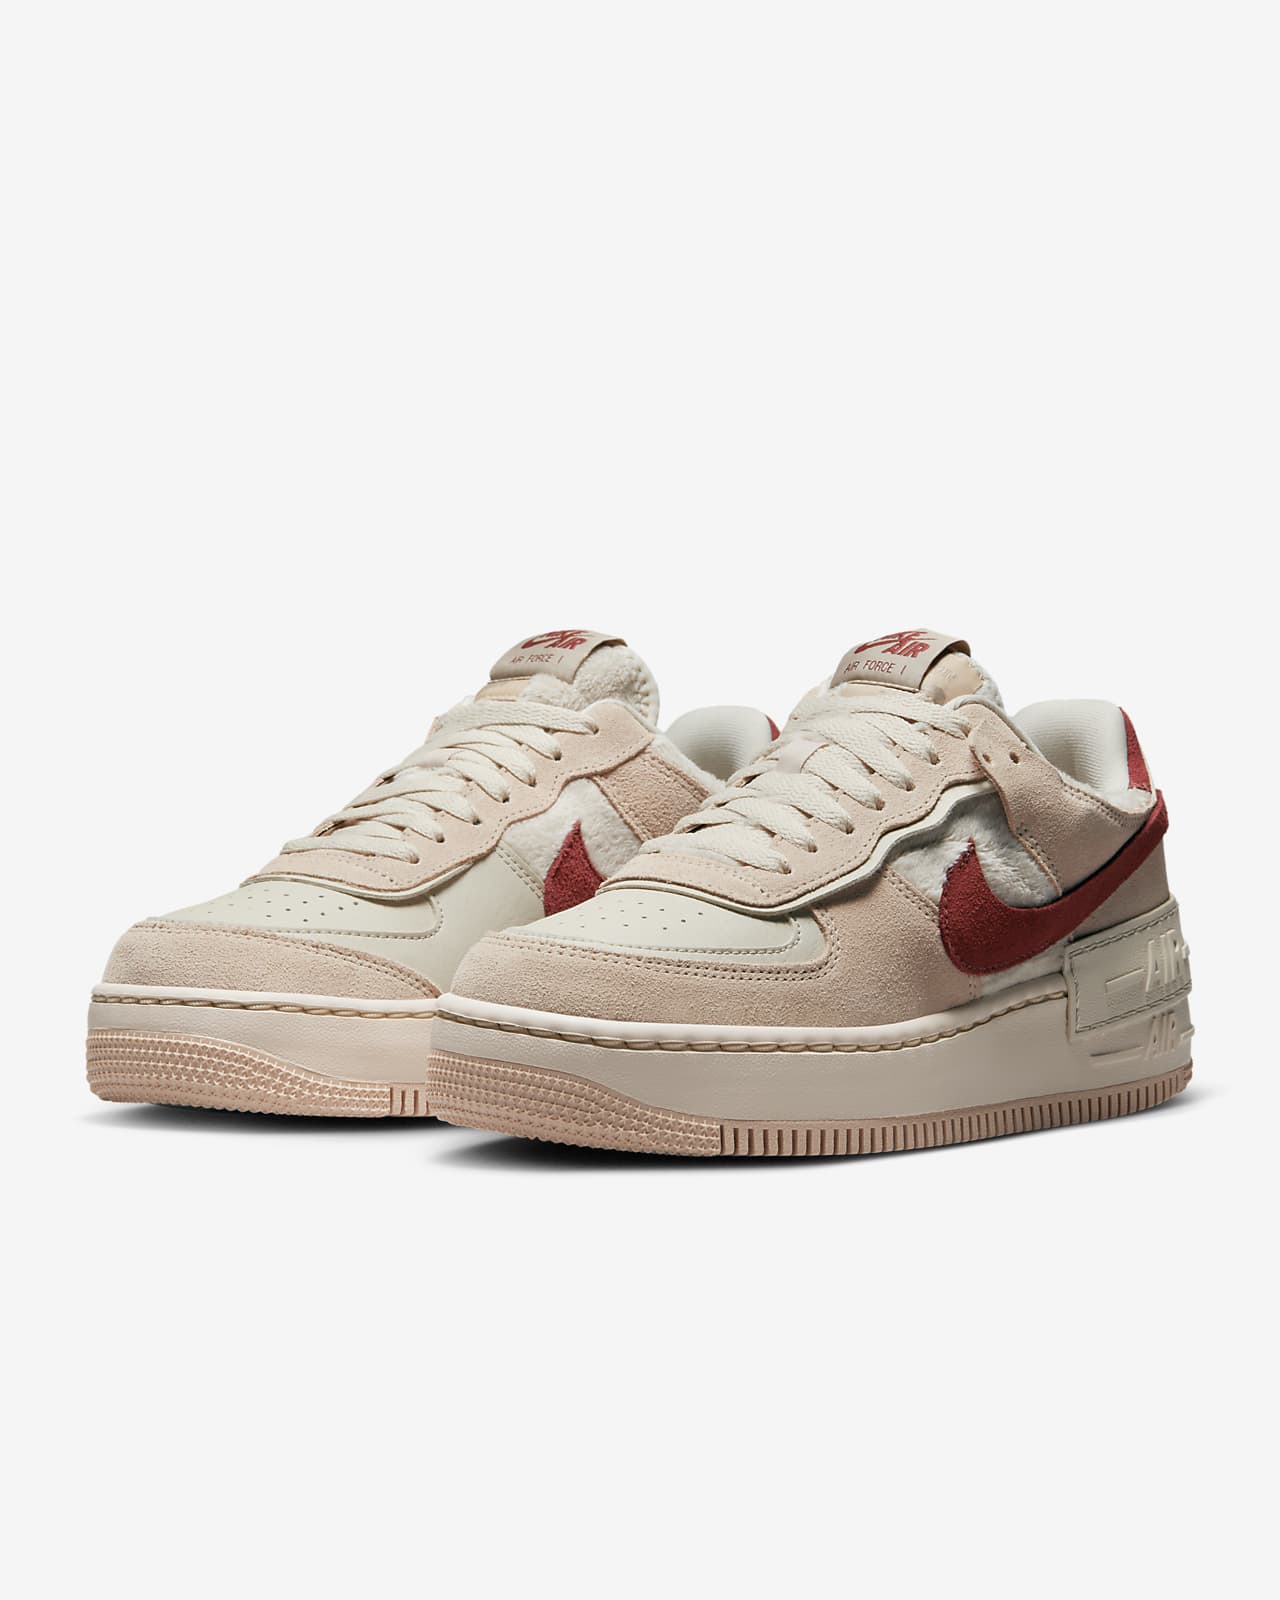 Nike Air Force 1 Low Chocolate 'Color of the Month' SNKRS Release Info –  Footwear News